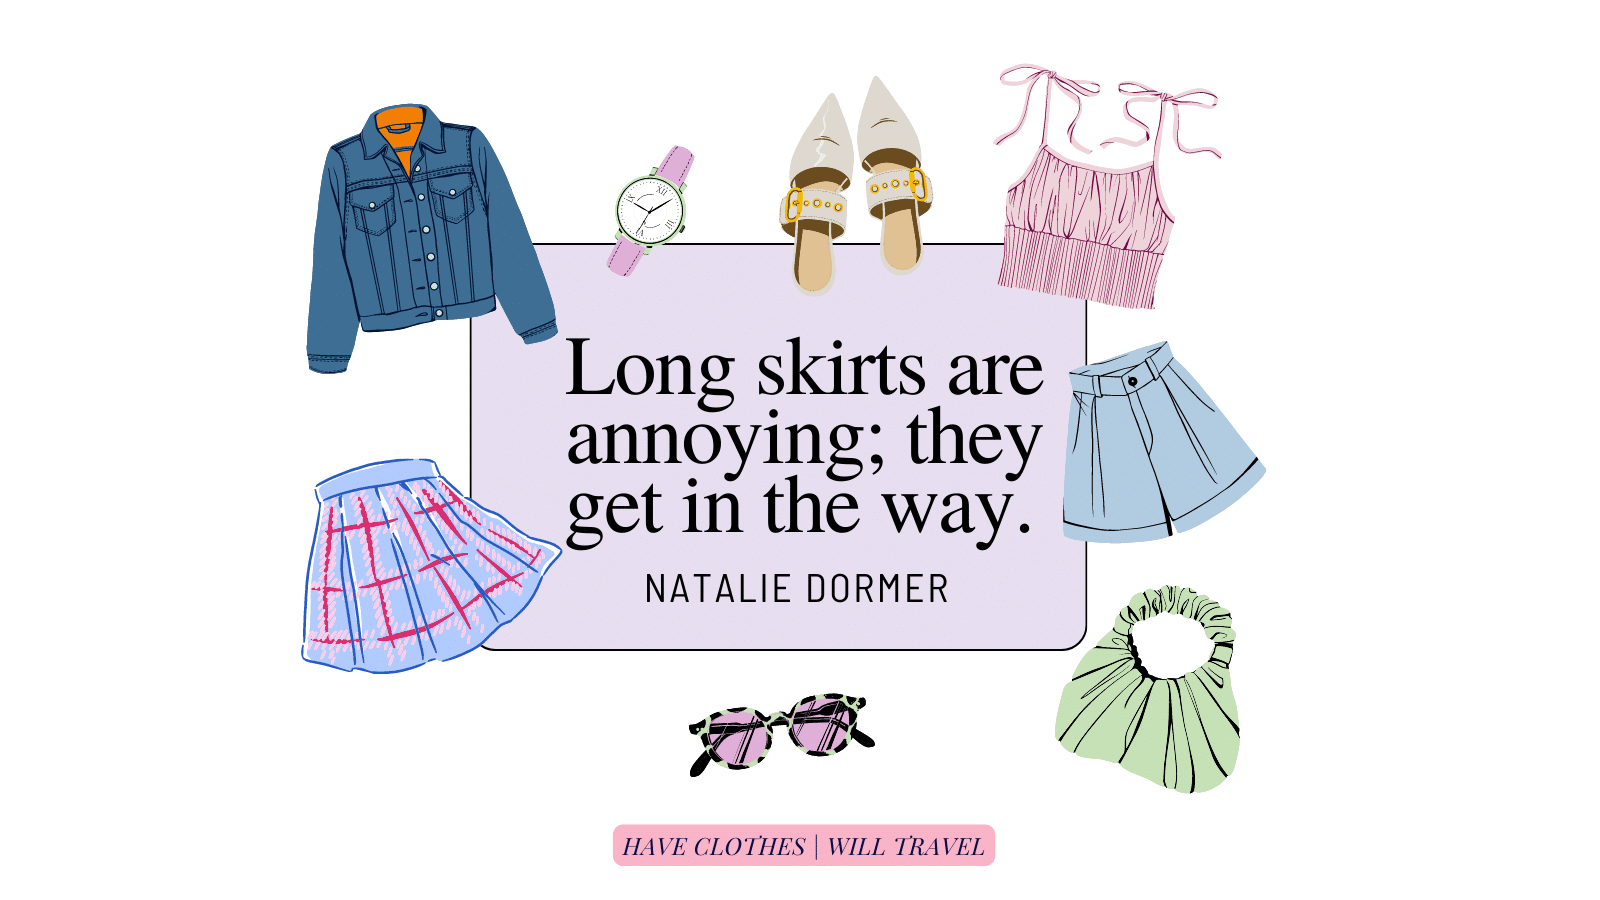 77. Long skirts are annoying; they get in the way. - Natalie Dormer